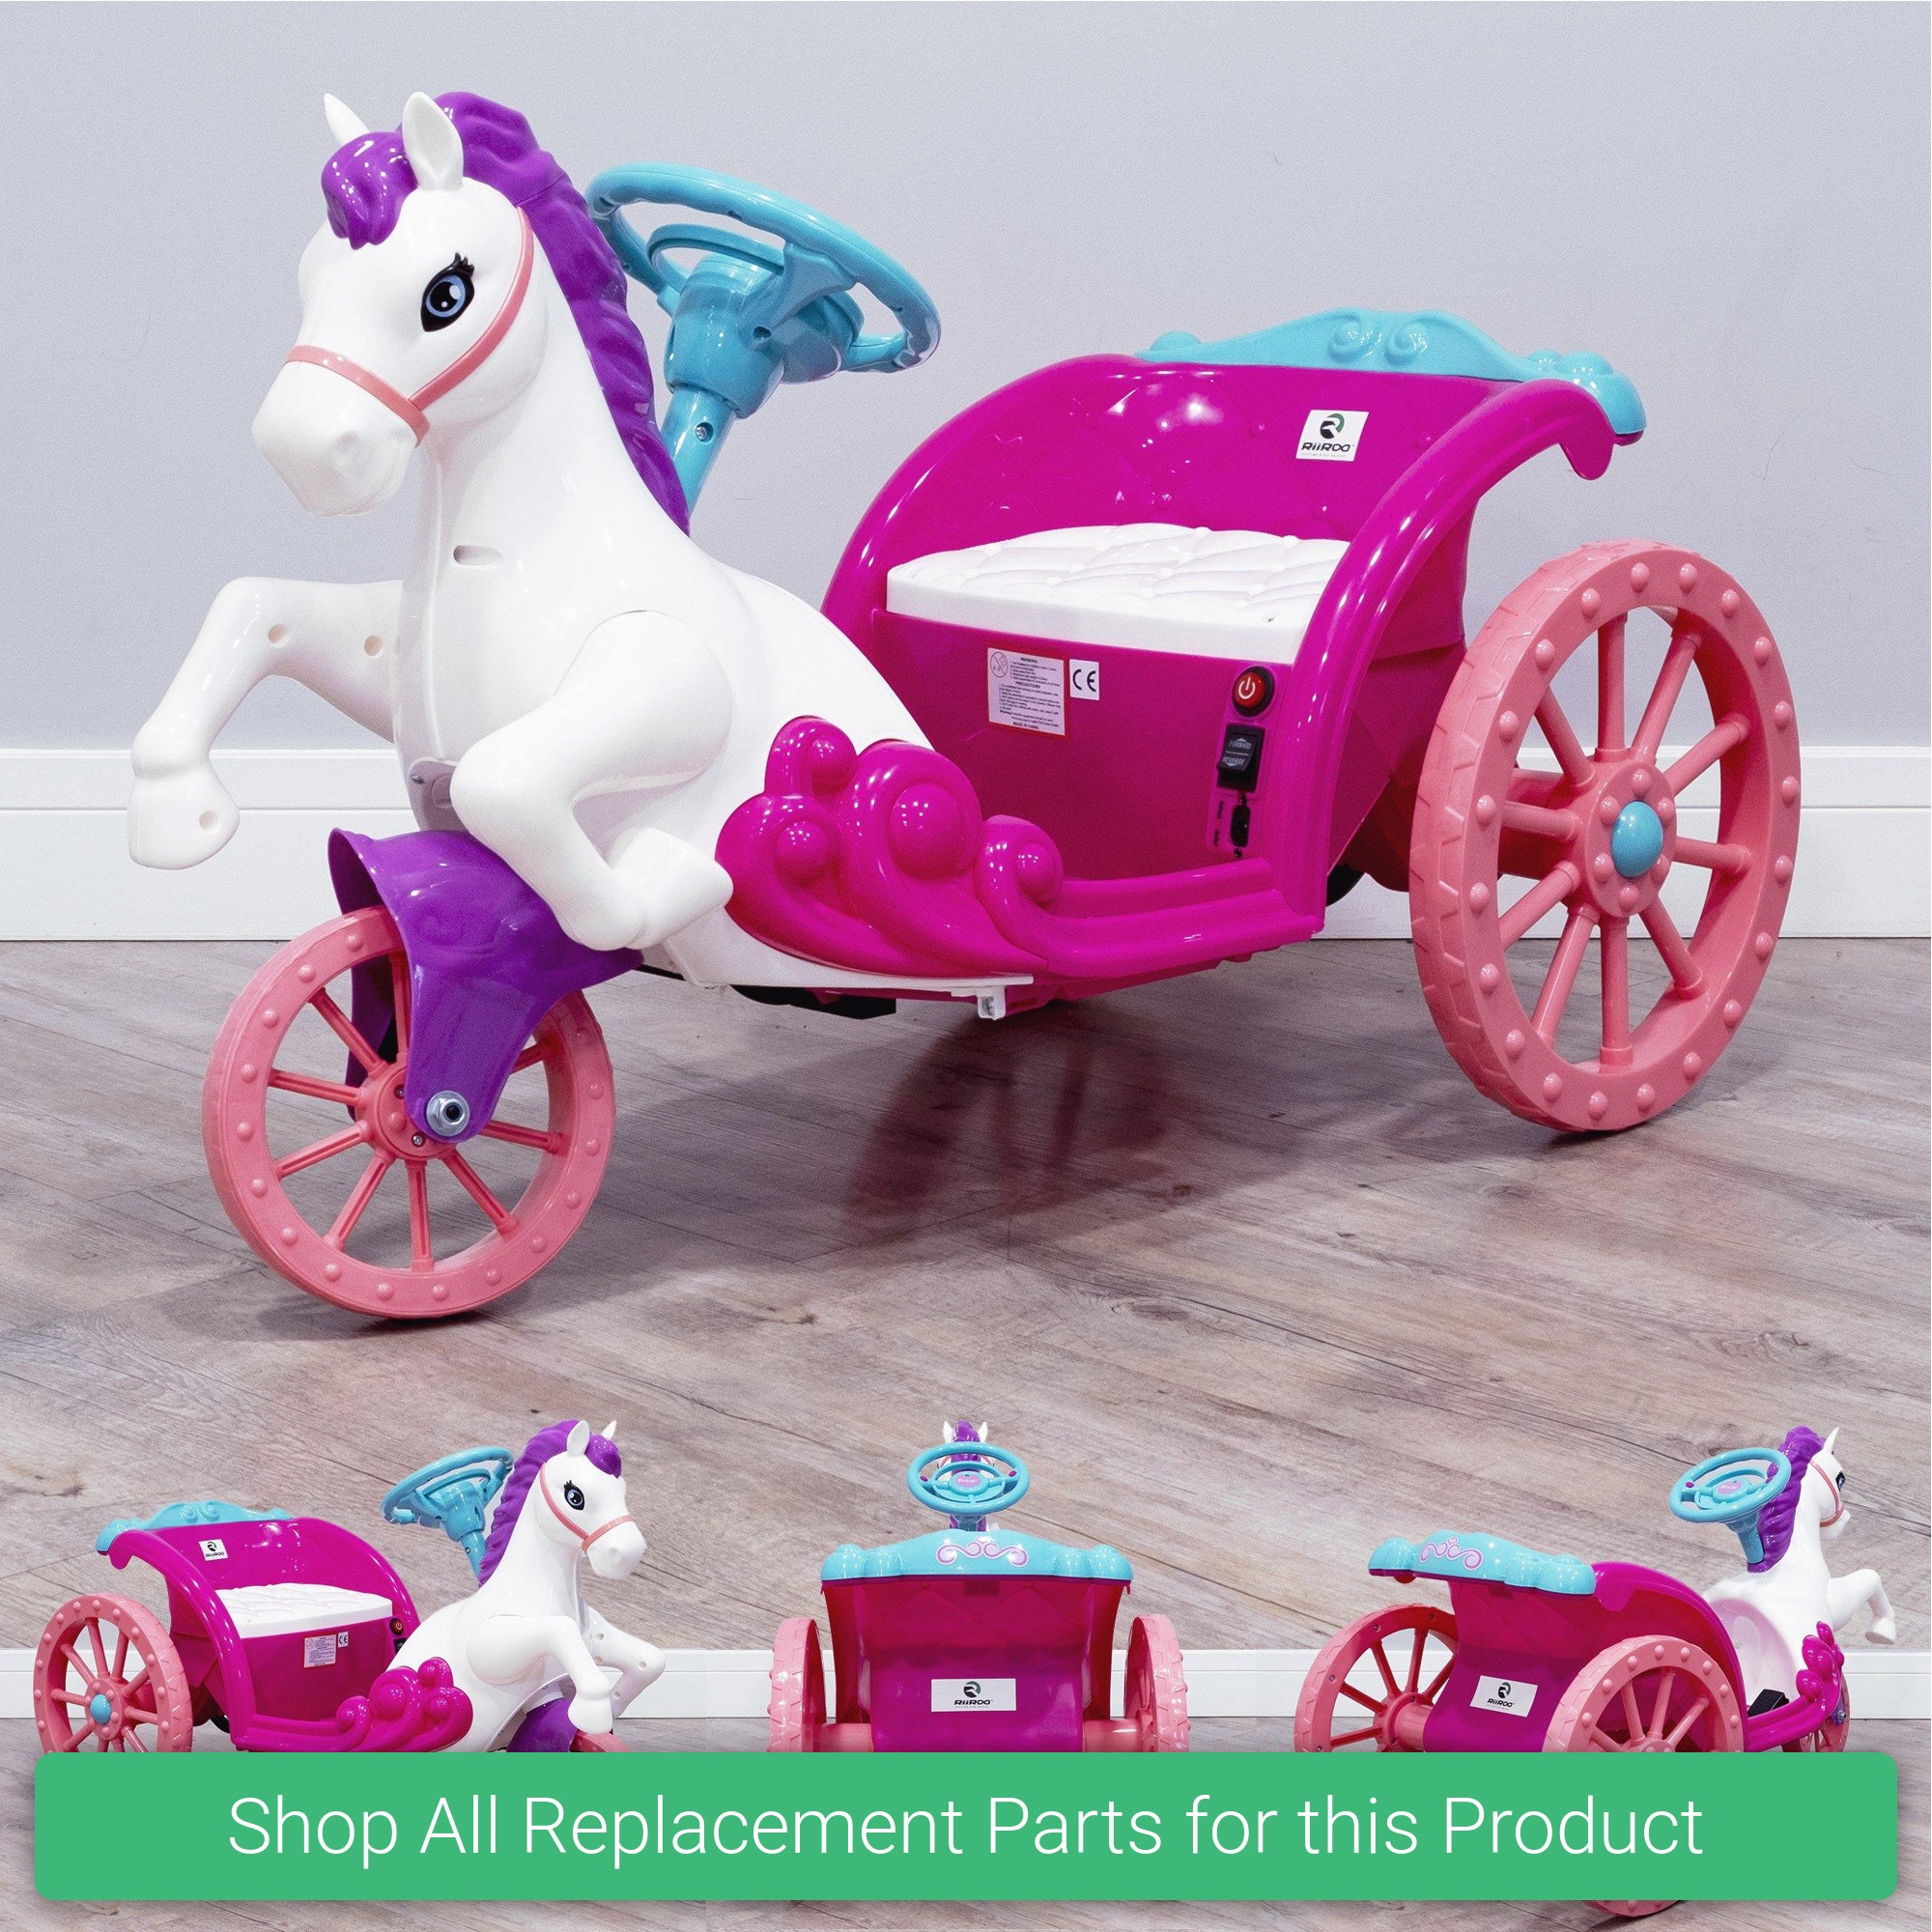 Replacement Parts and Spares for Kids 6V Unicorn Ride On Princes Carriage  - Pink - UNI-6V-PIN - ZP3888